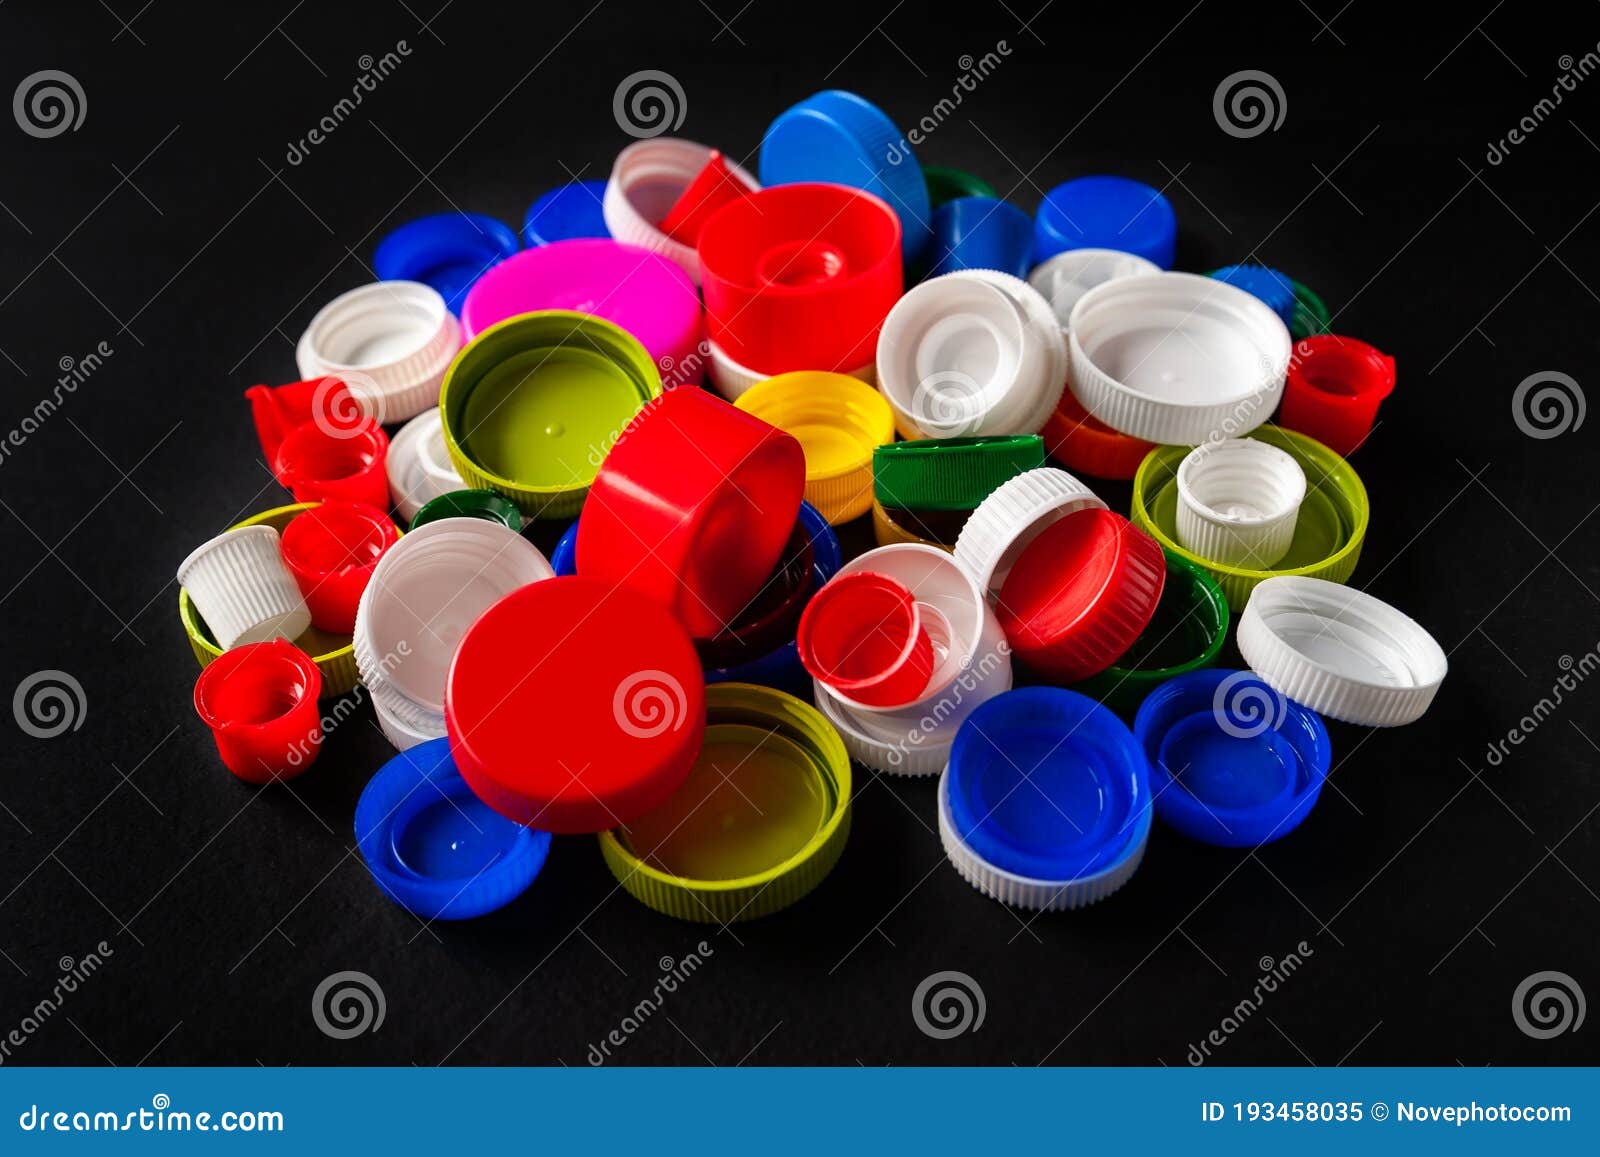 Recycled Plastic Bottle Caps. Colorful Caps Of Plastic Bottles On A ...